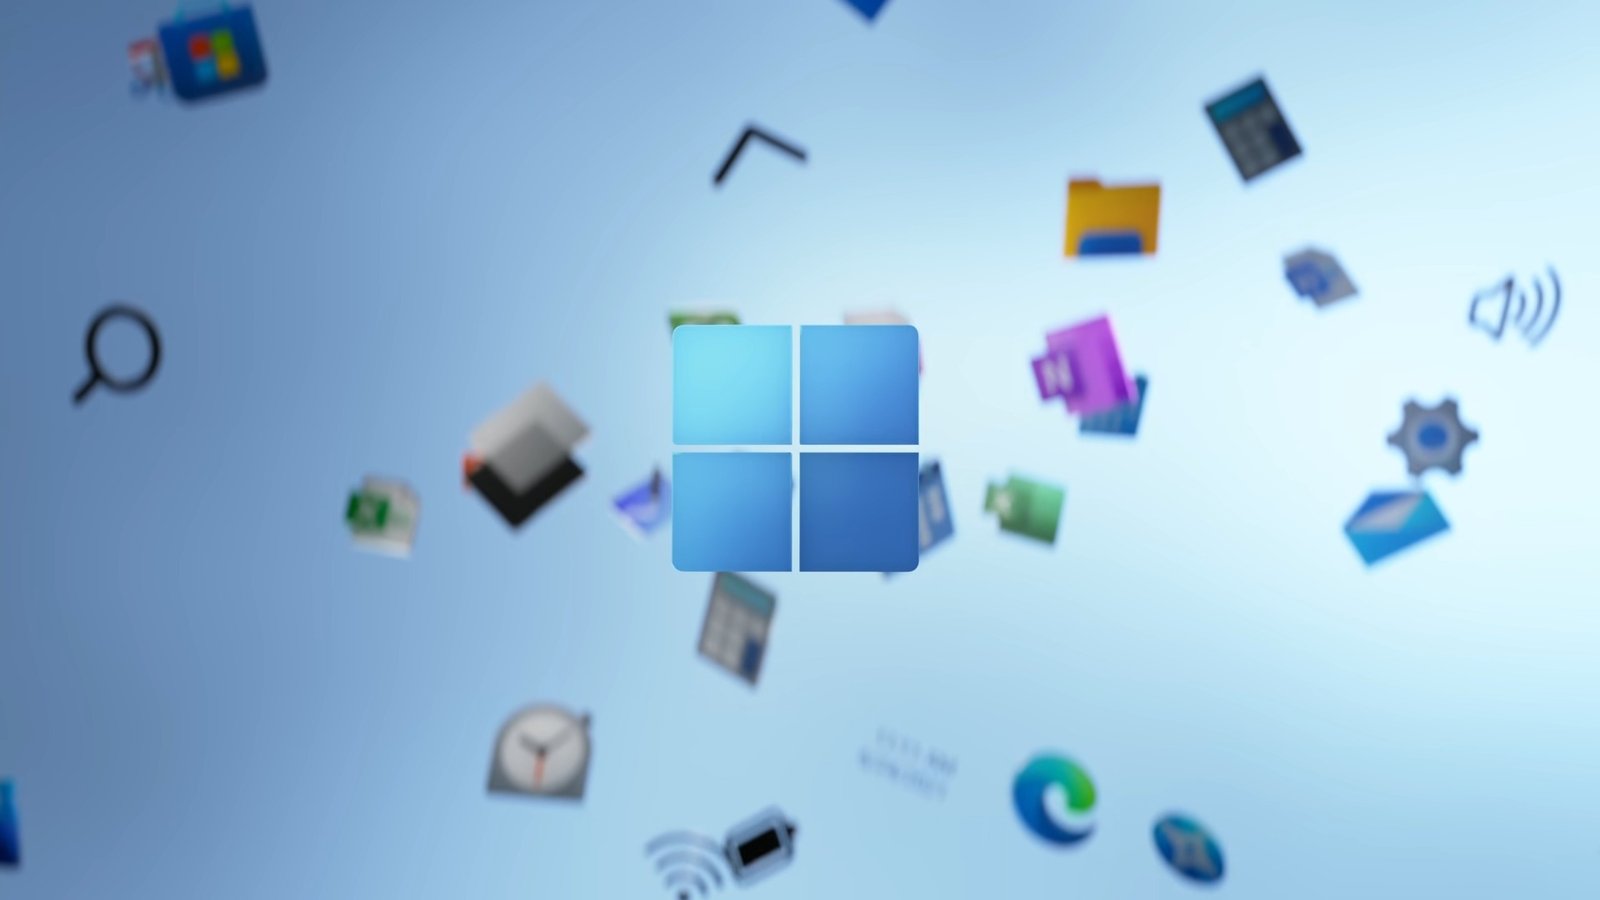 Windows 11’s Start Menu could soon get even busier with floating widgets